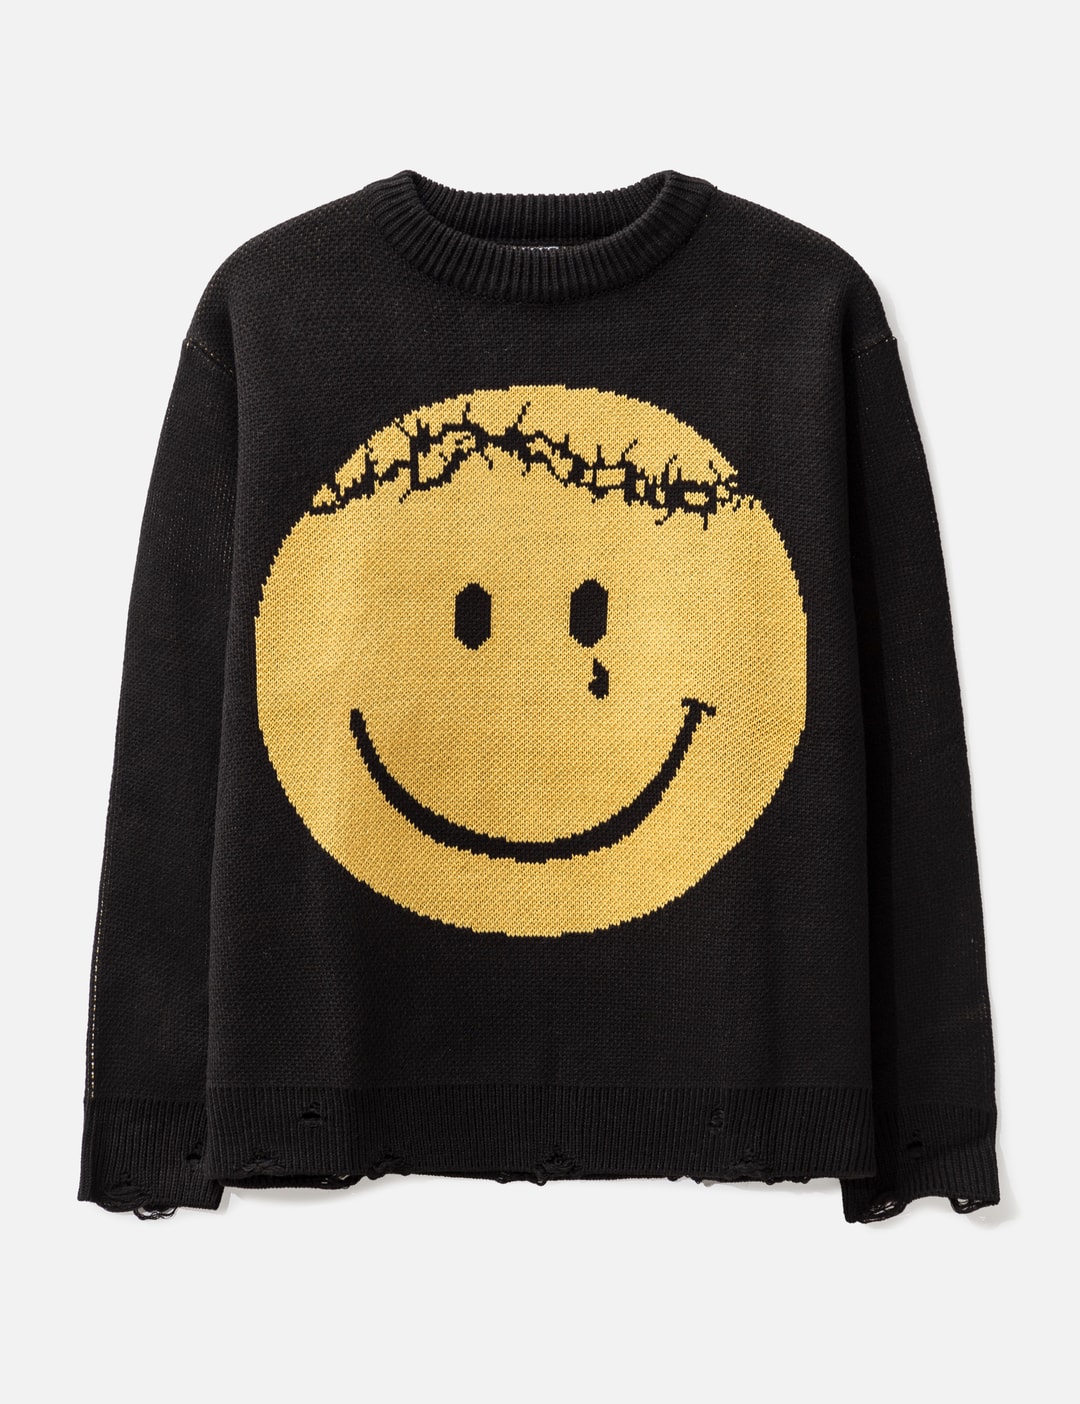 Someit - K.O.K VINTAGE KNIT | HBX - Globally Curated Fashion and ...